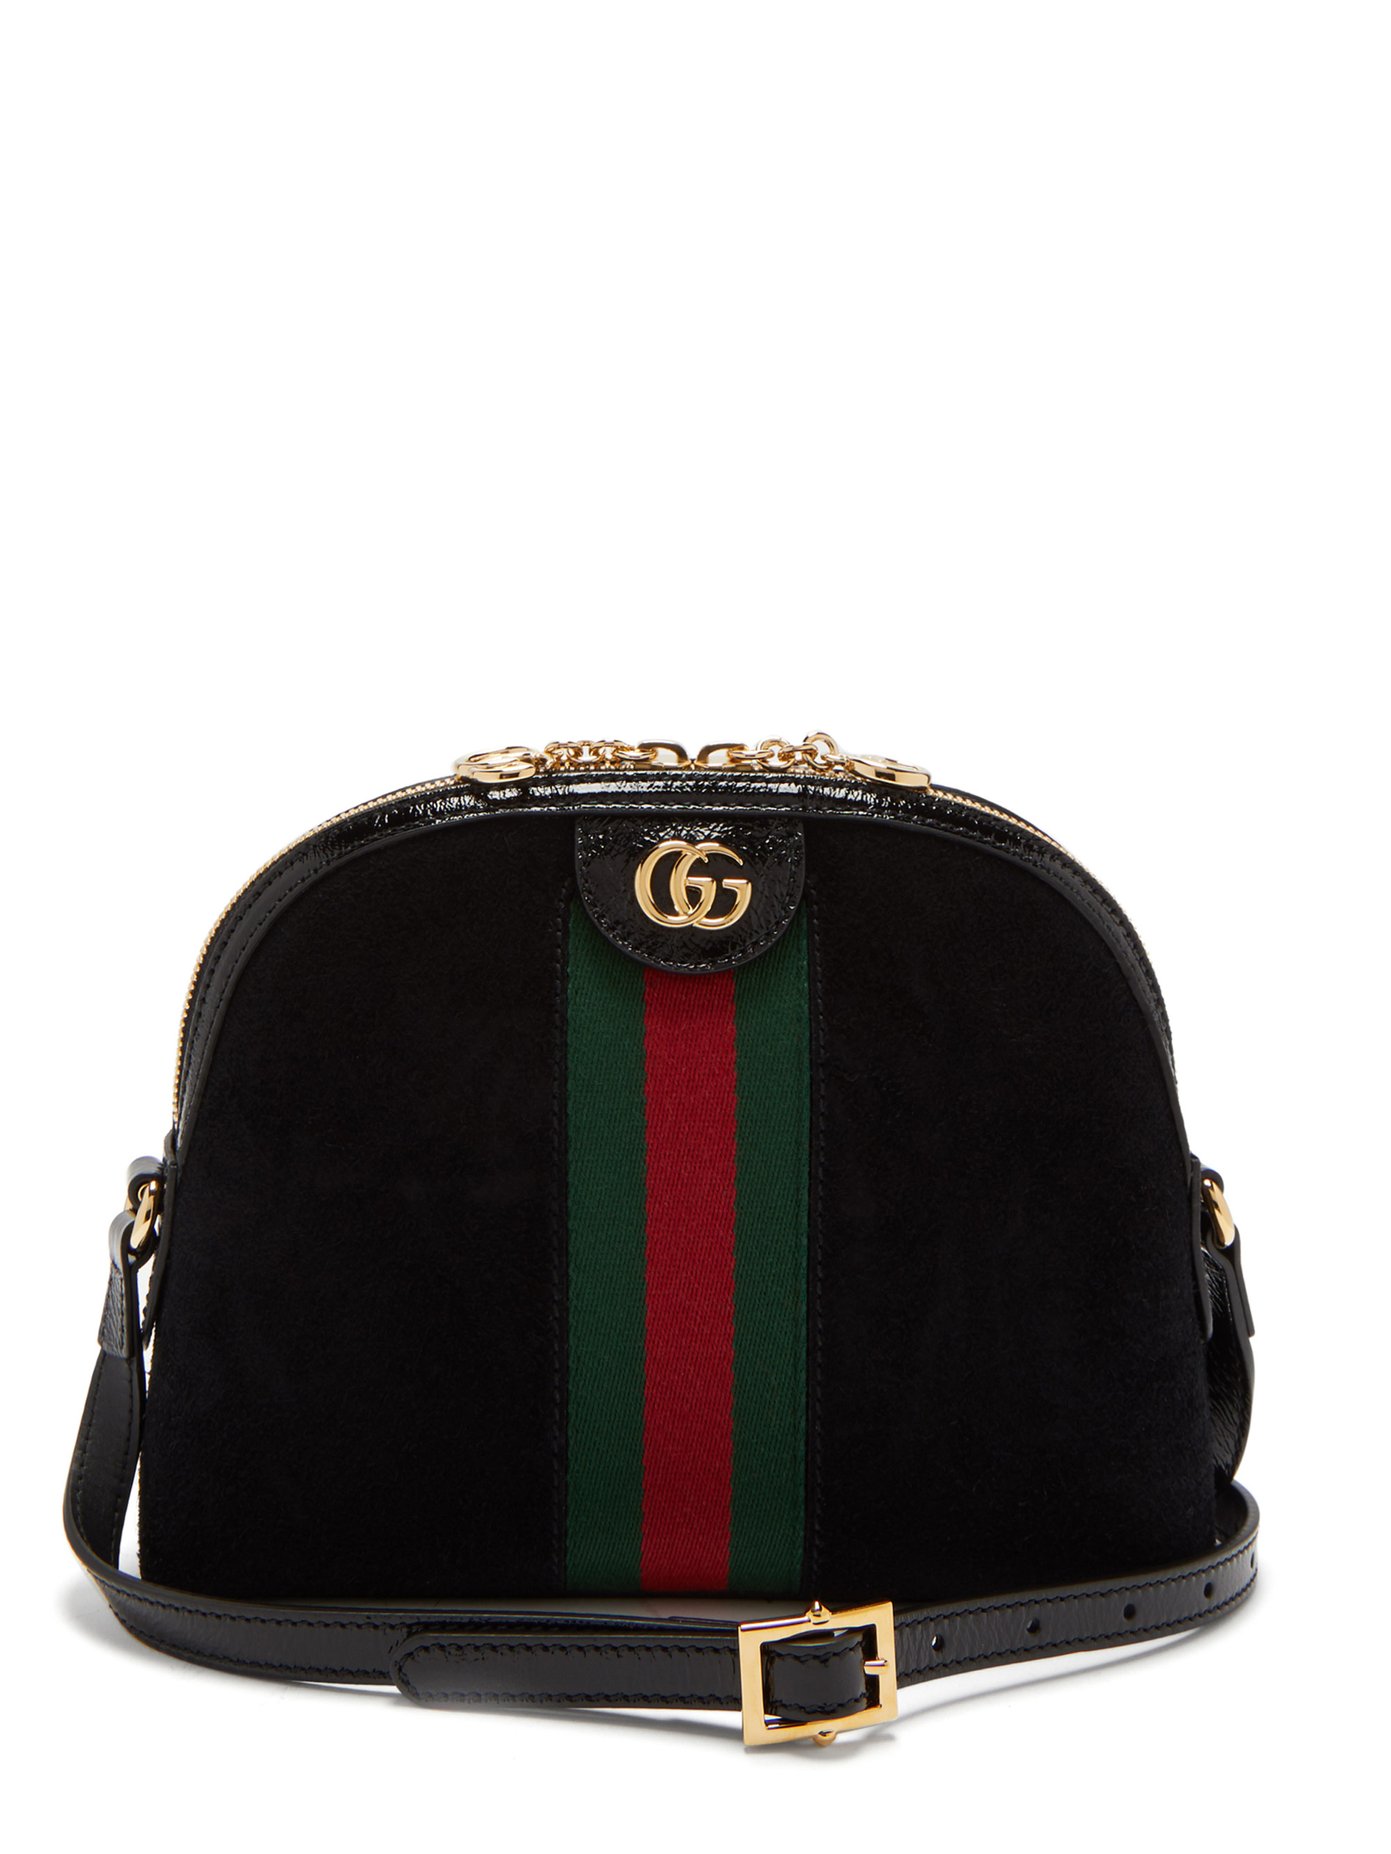 Ophidia GG suede cross-body bag | Gucci 